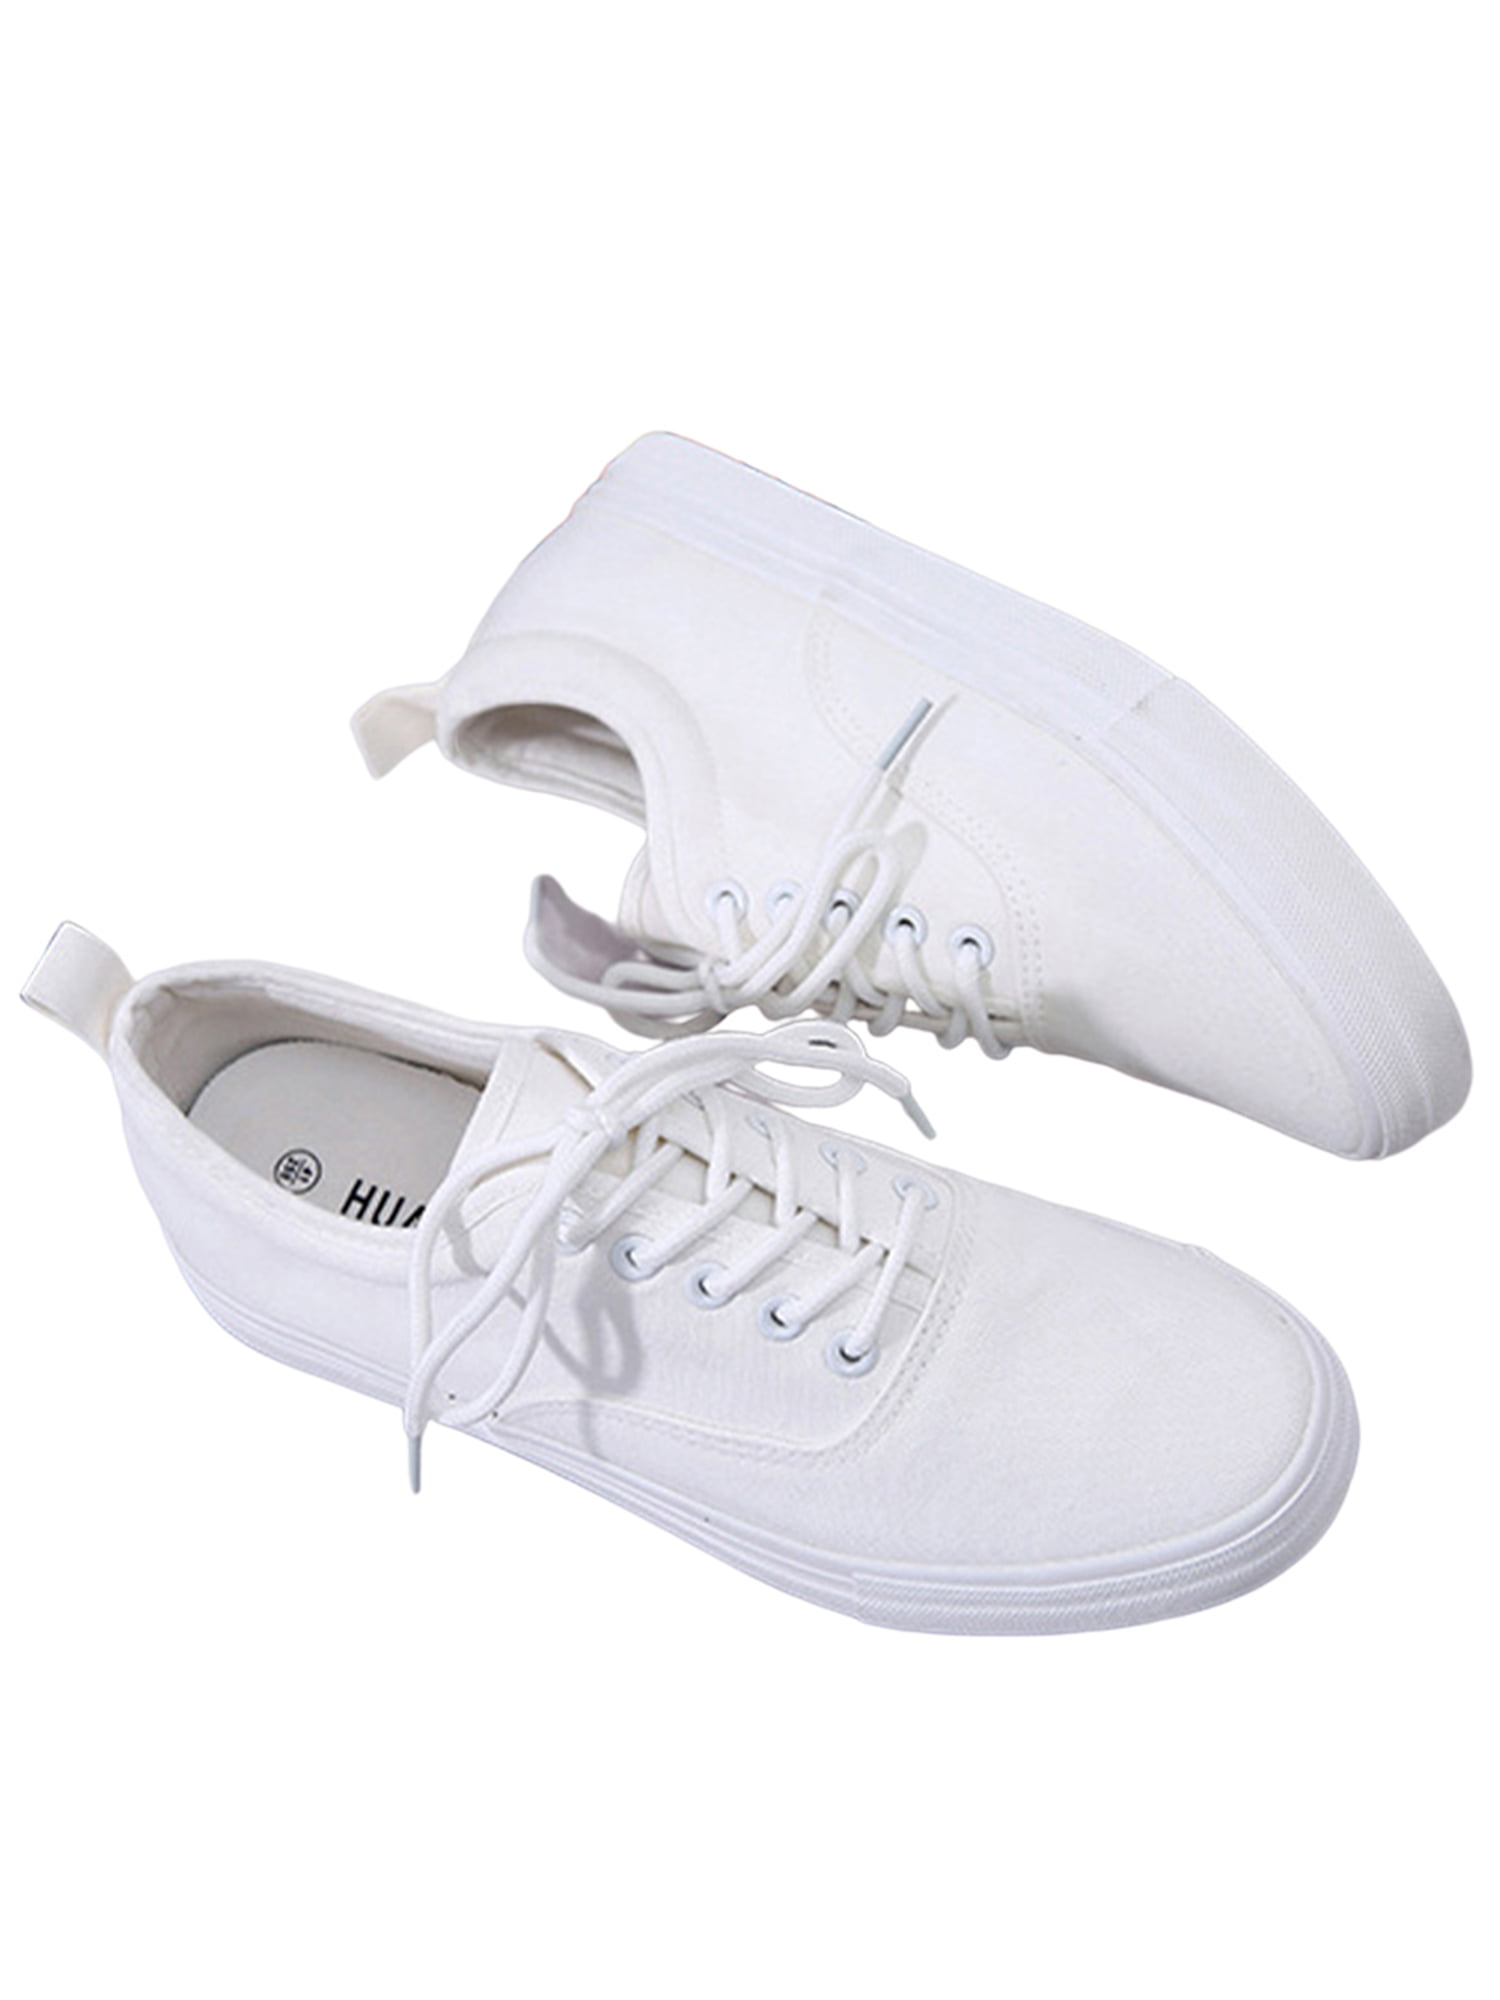 Unisex Canvas Sneakers High Top Lace ups Casual Comfortable Walking Shoes Trainers for Women Men Flat Loafers 